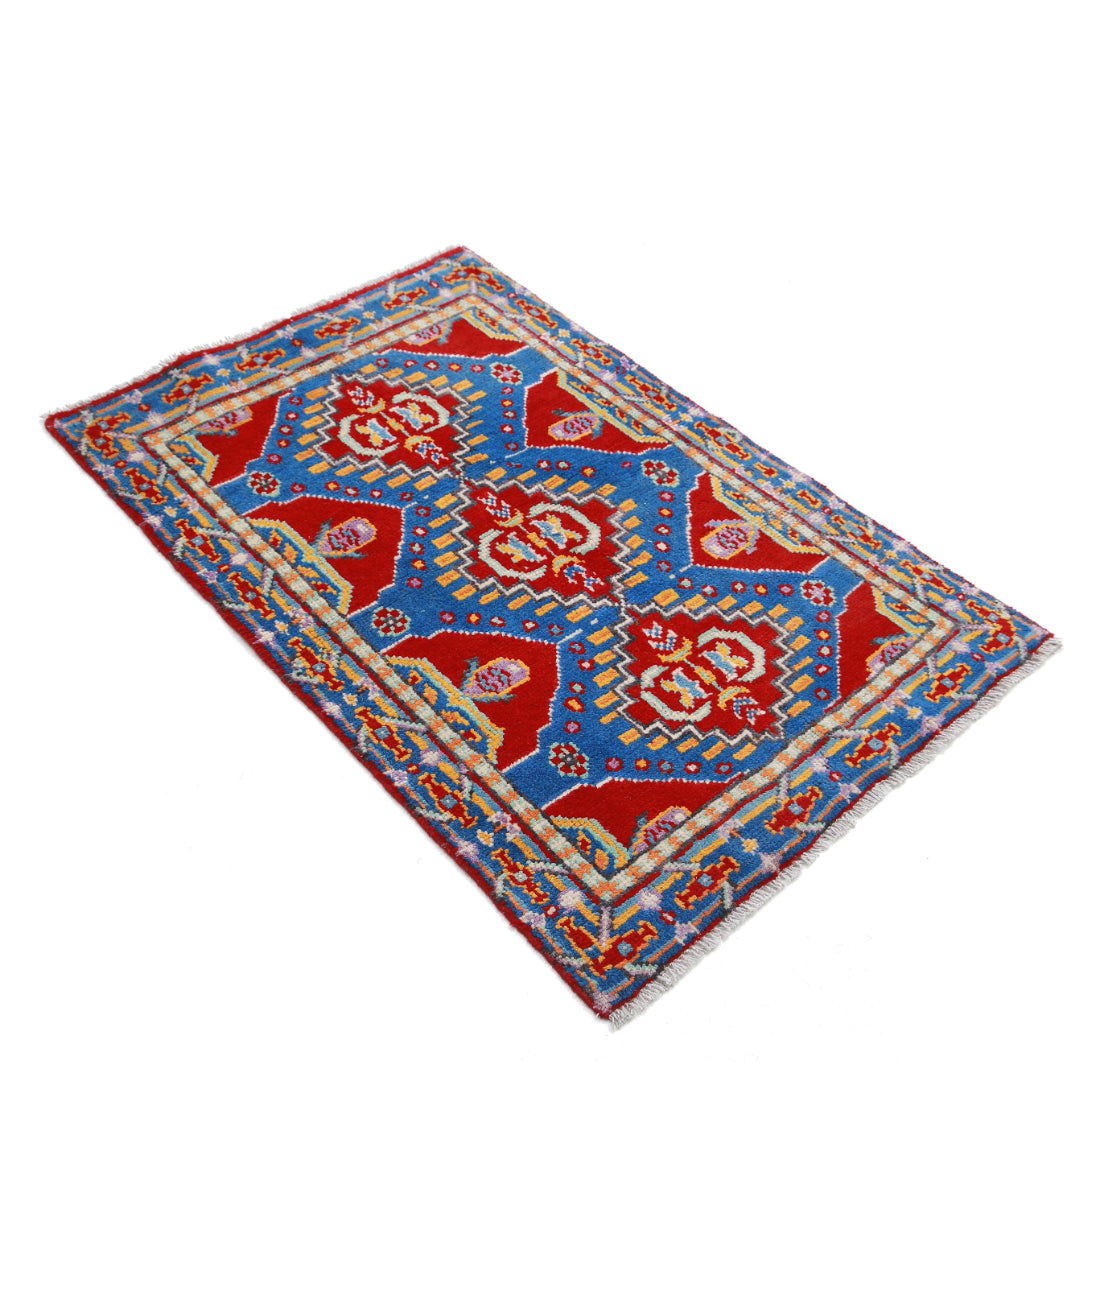 Revival 2'7'' X 3'10'' Hand-Knotted Wool Rug 2'7'' x 3'10'' (78 X 115) / Red / Blue